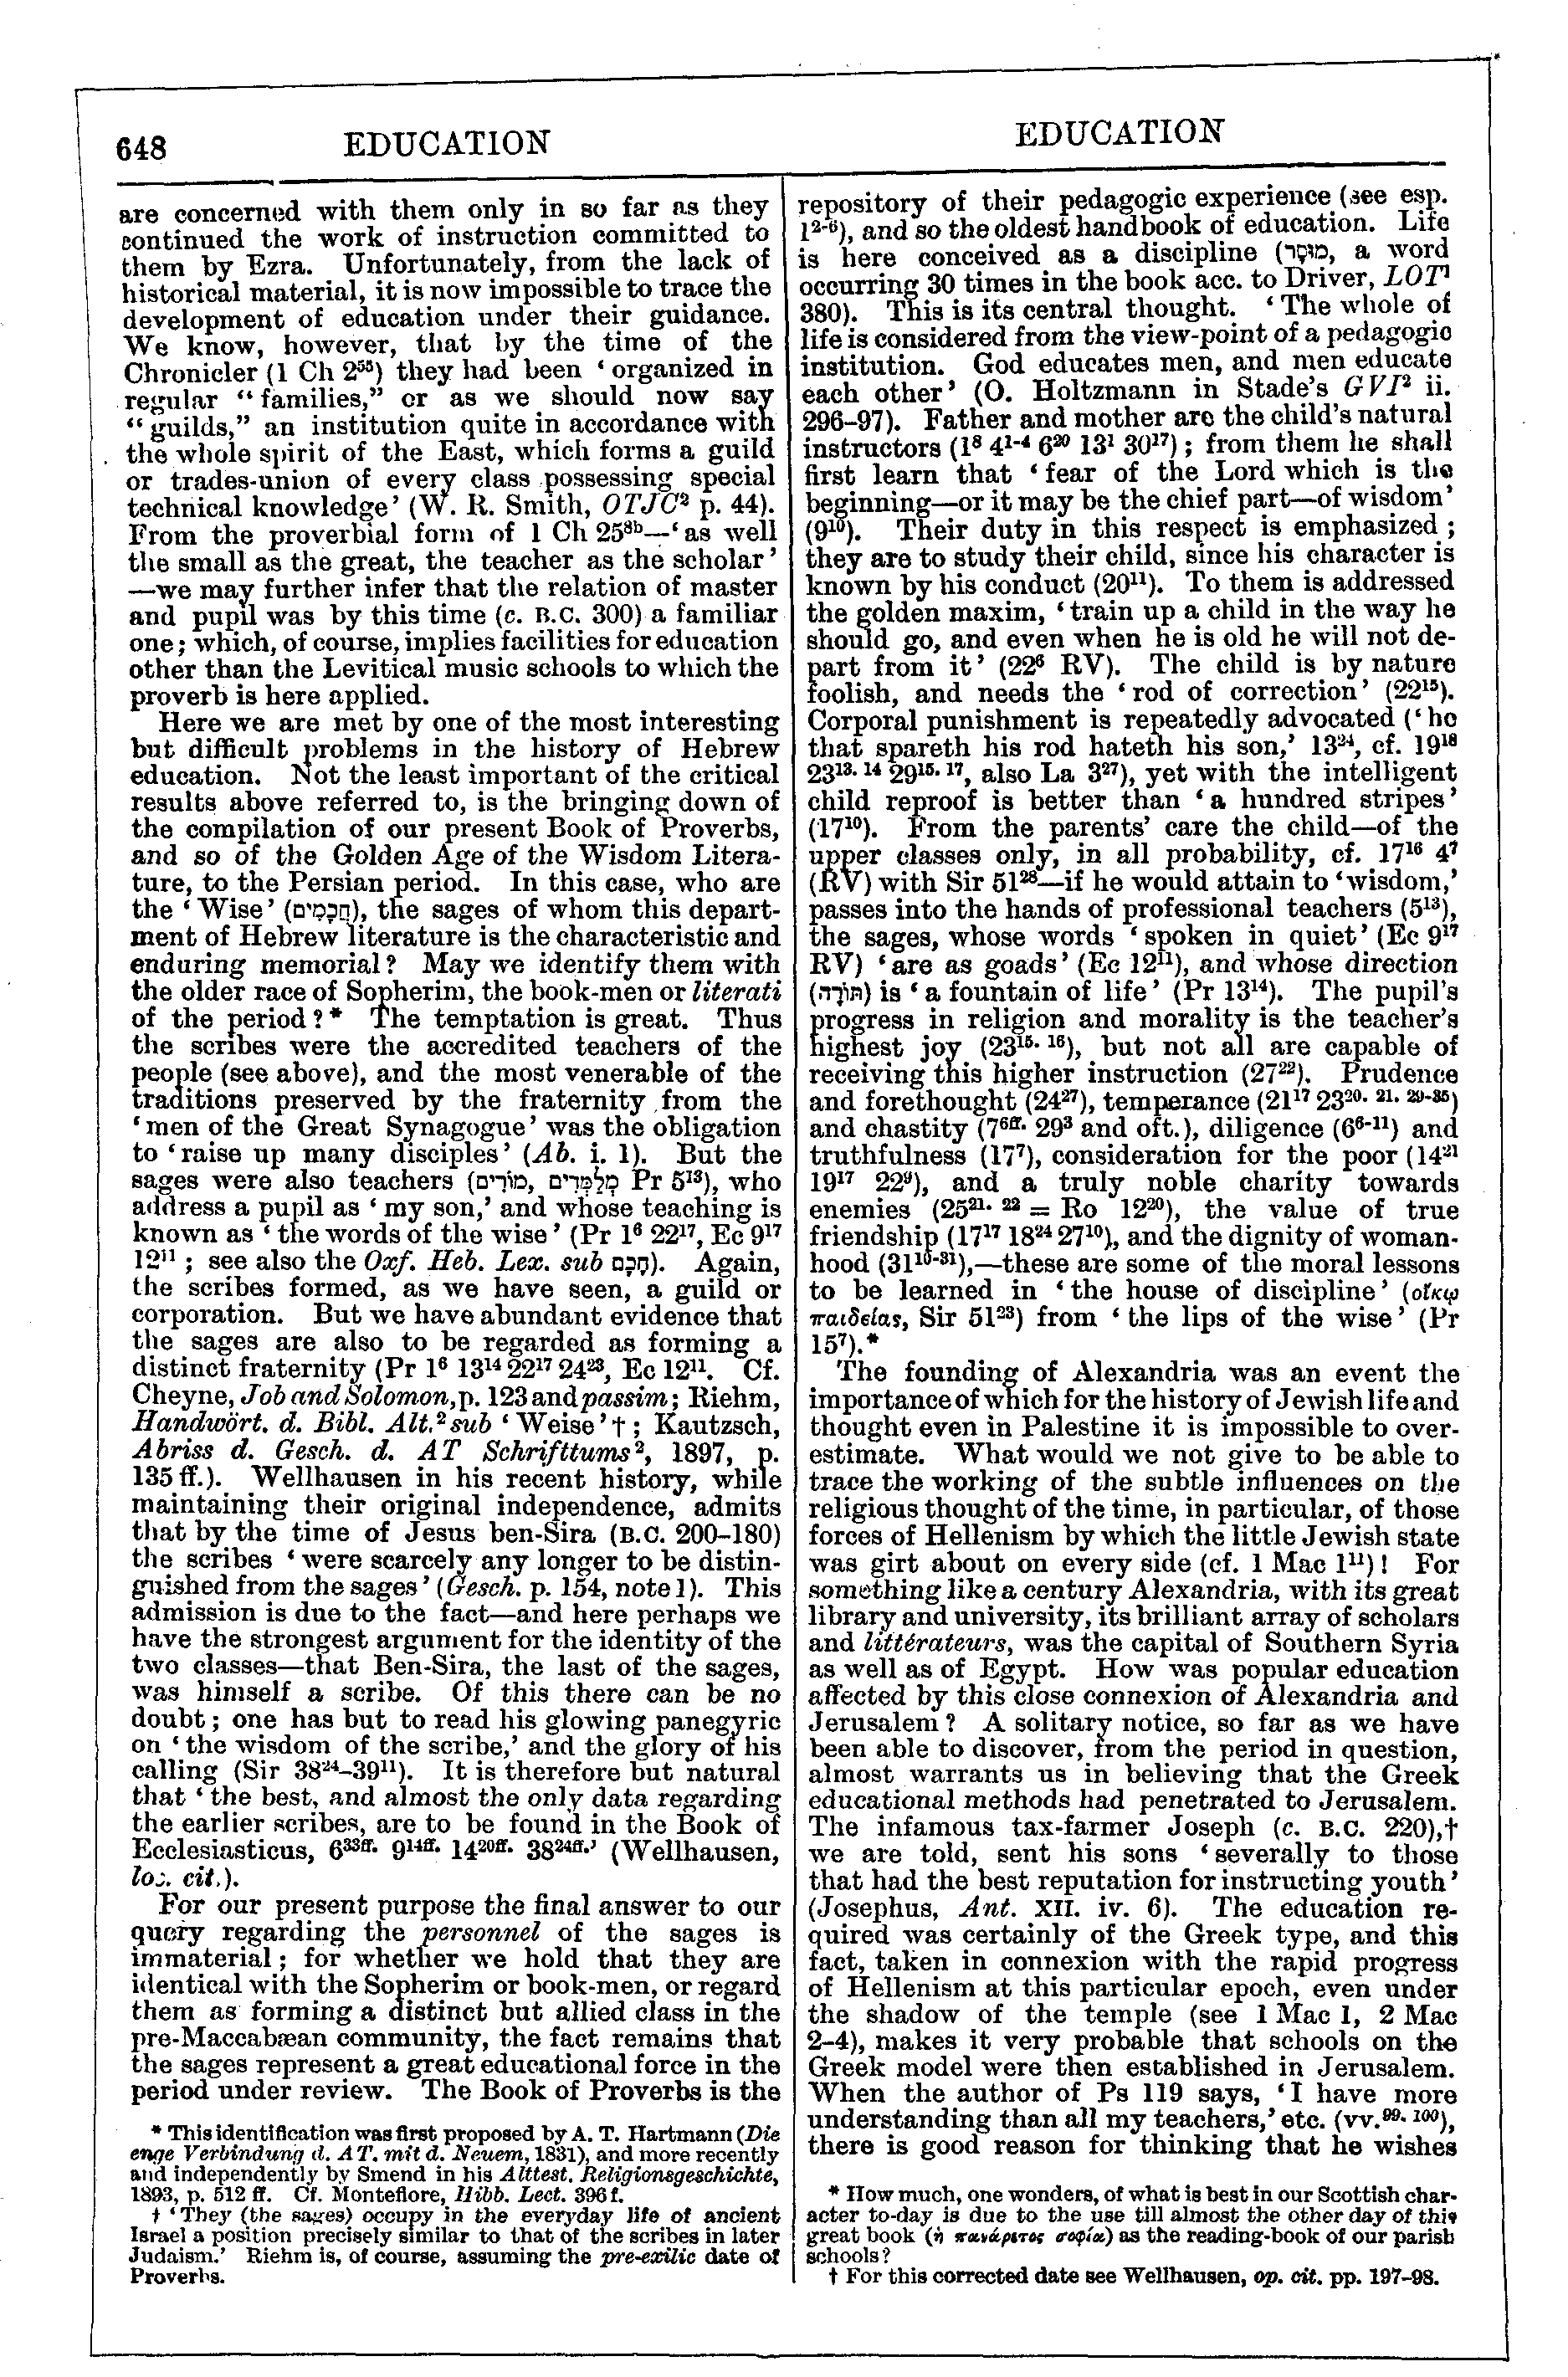 Image of page 648